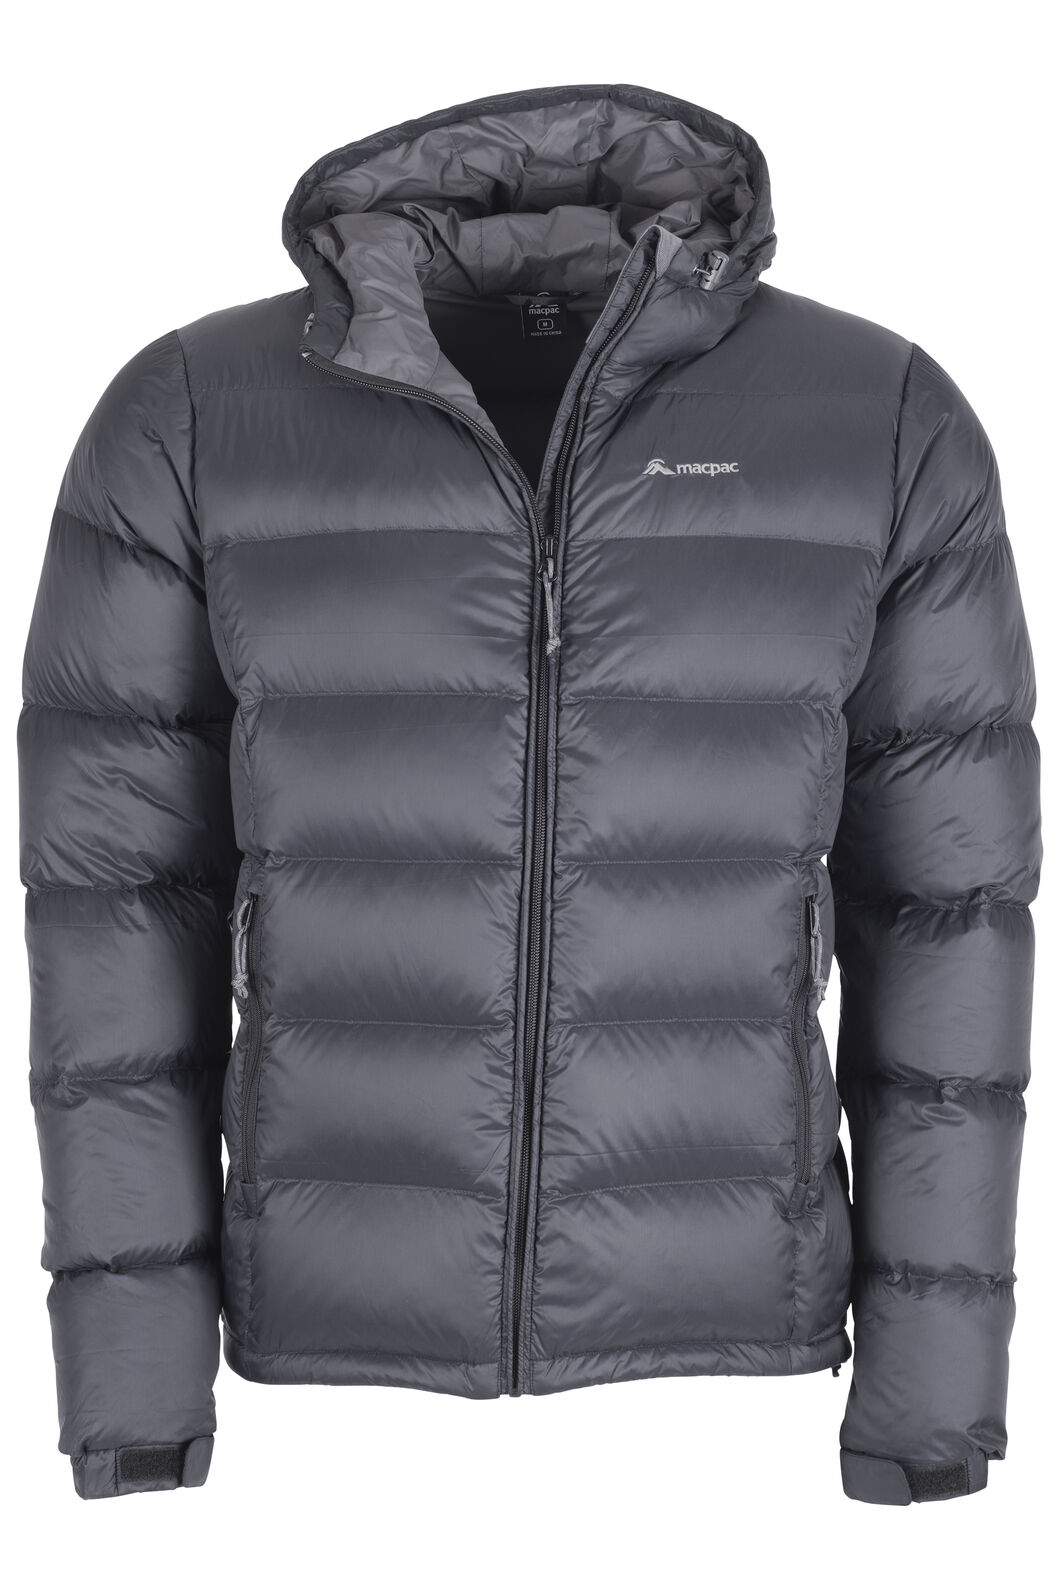 Halo Hooded Down Jacket - Men's